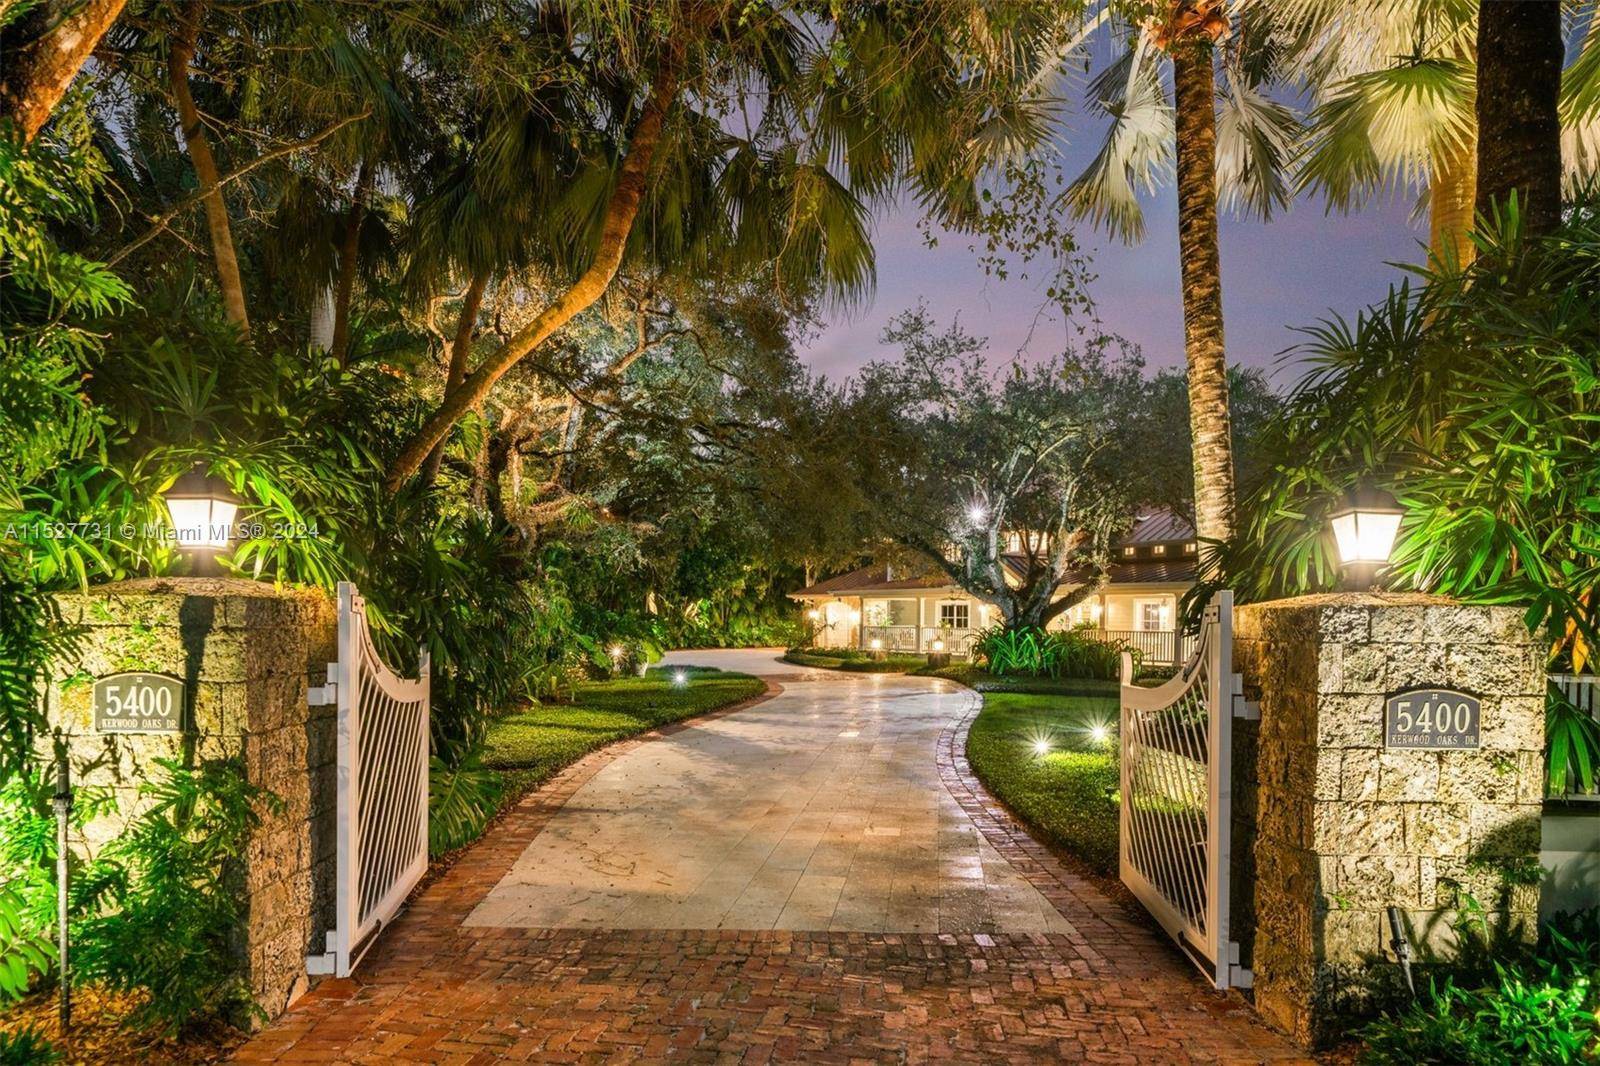 Located in the guard gated Banyan Lakes neighborhood, this 2003 custom Old Florida estate style home w wraparound porches spans 8, 765 SF is the epitome of sophisticated living.